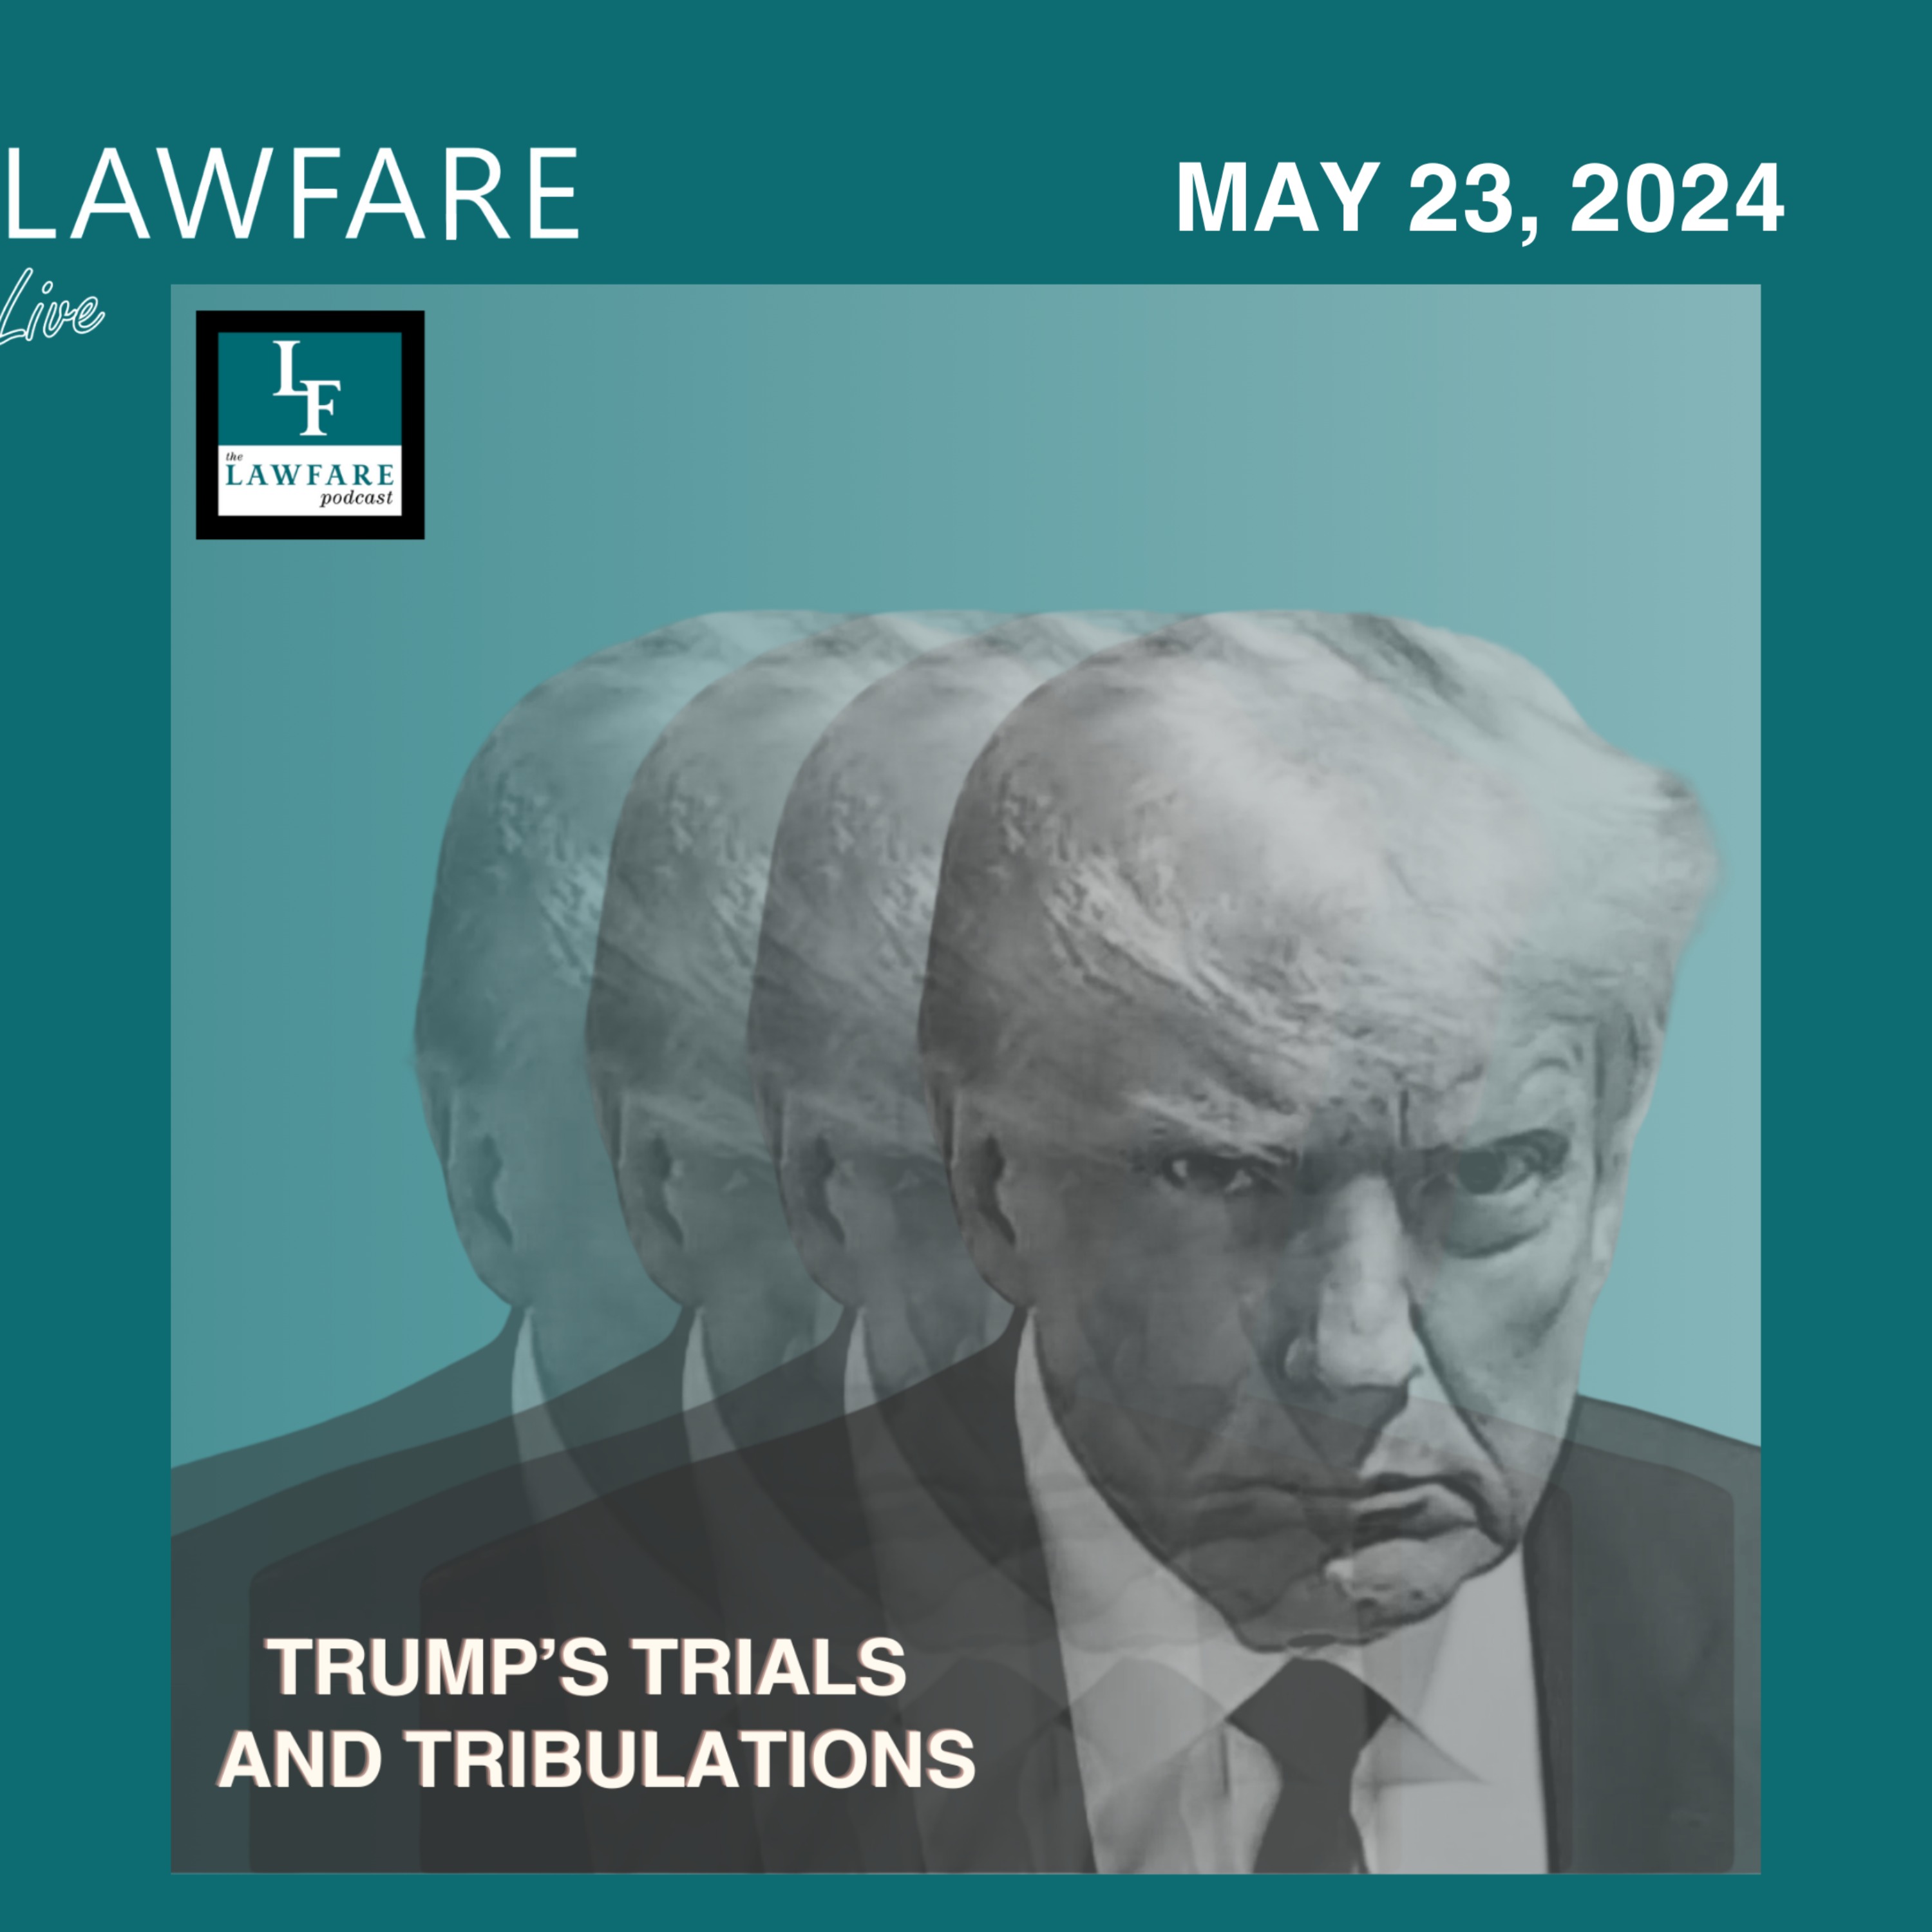 Lawfare Daily: Trump Trials and Tribulations Weekly Round-up (May 23, 2024)